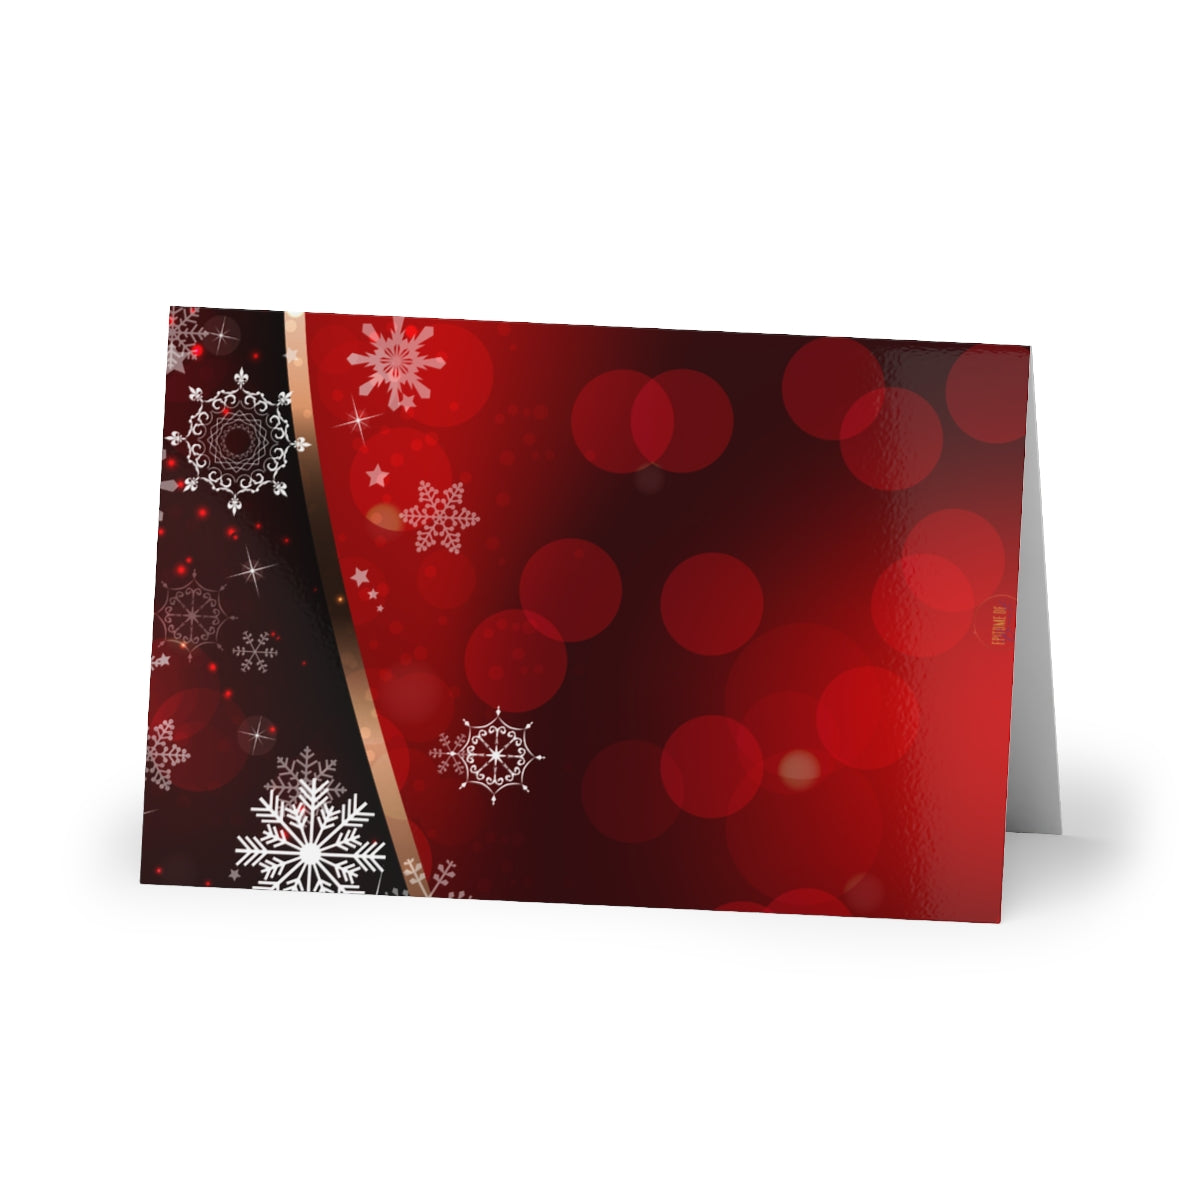 Baby it's Cold Outside Greeting Card (1 -pcs)